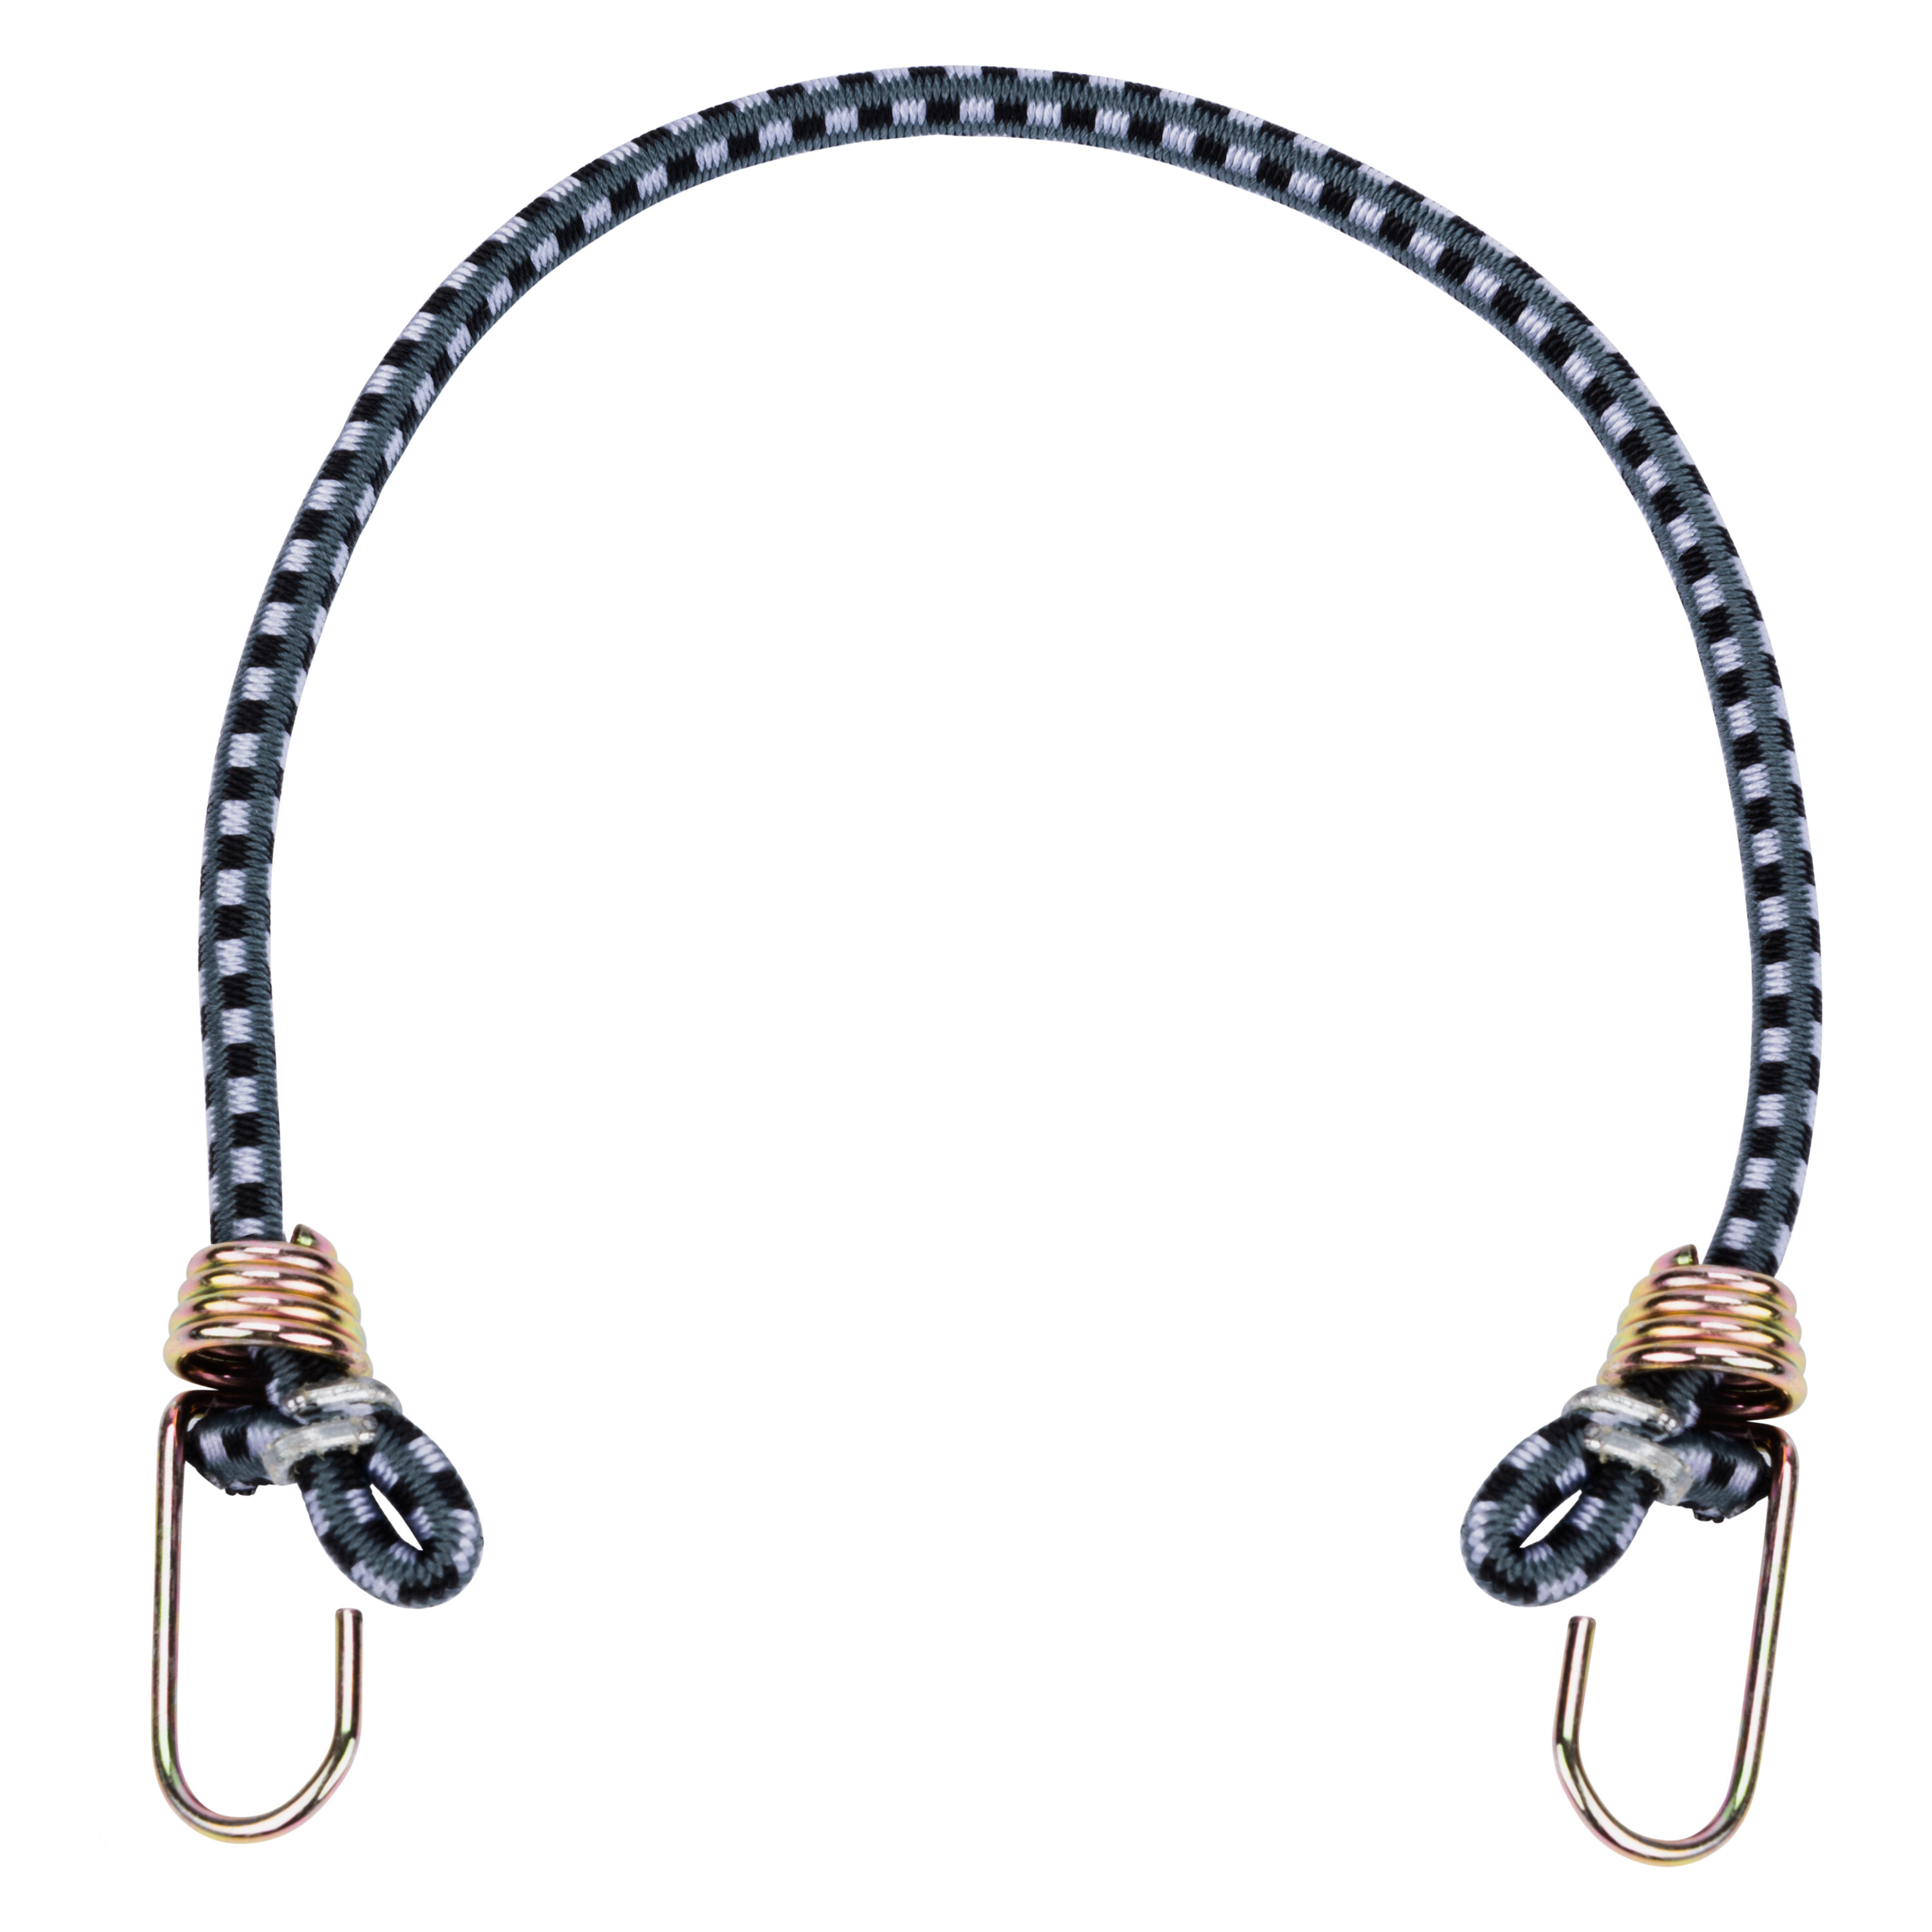 Keeper - 24” Mega Hook Bungee Cord - UV And Weather-Resistant